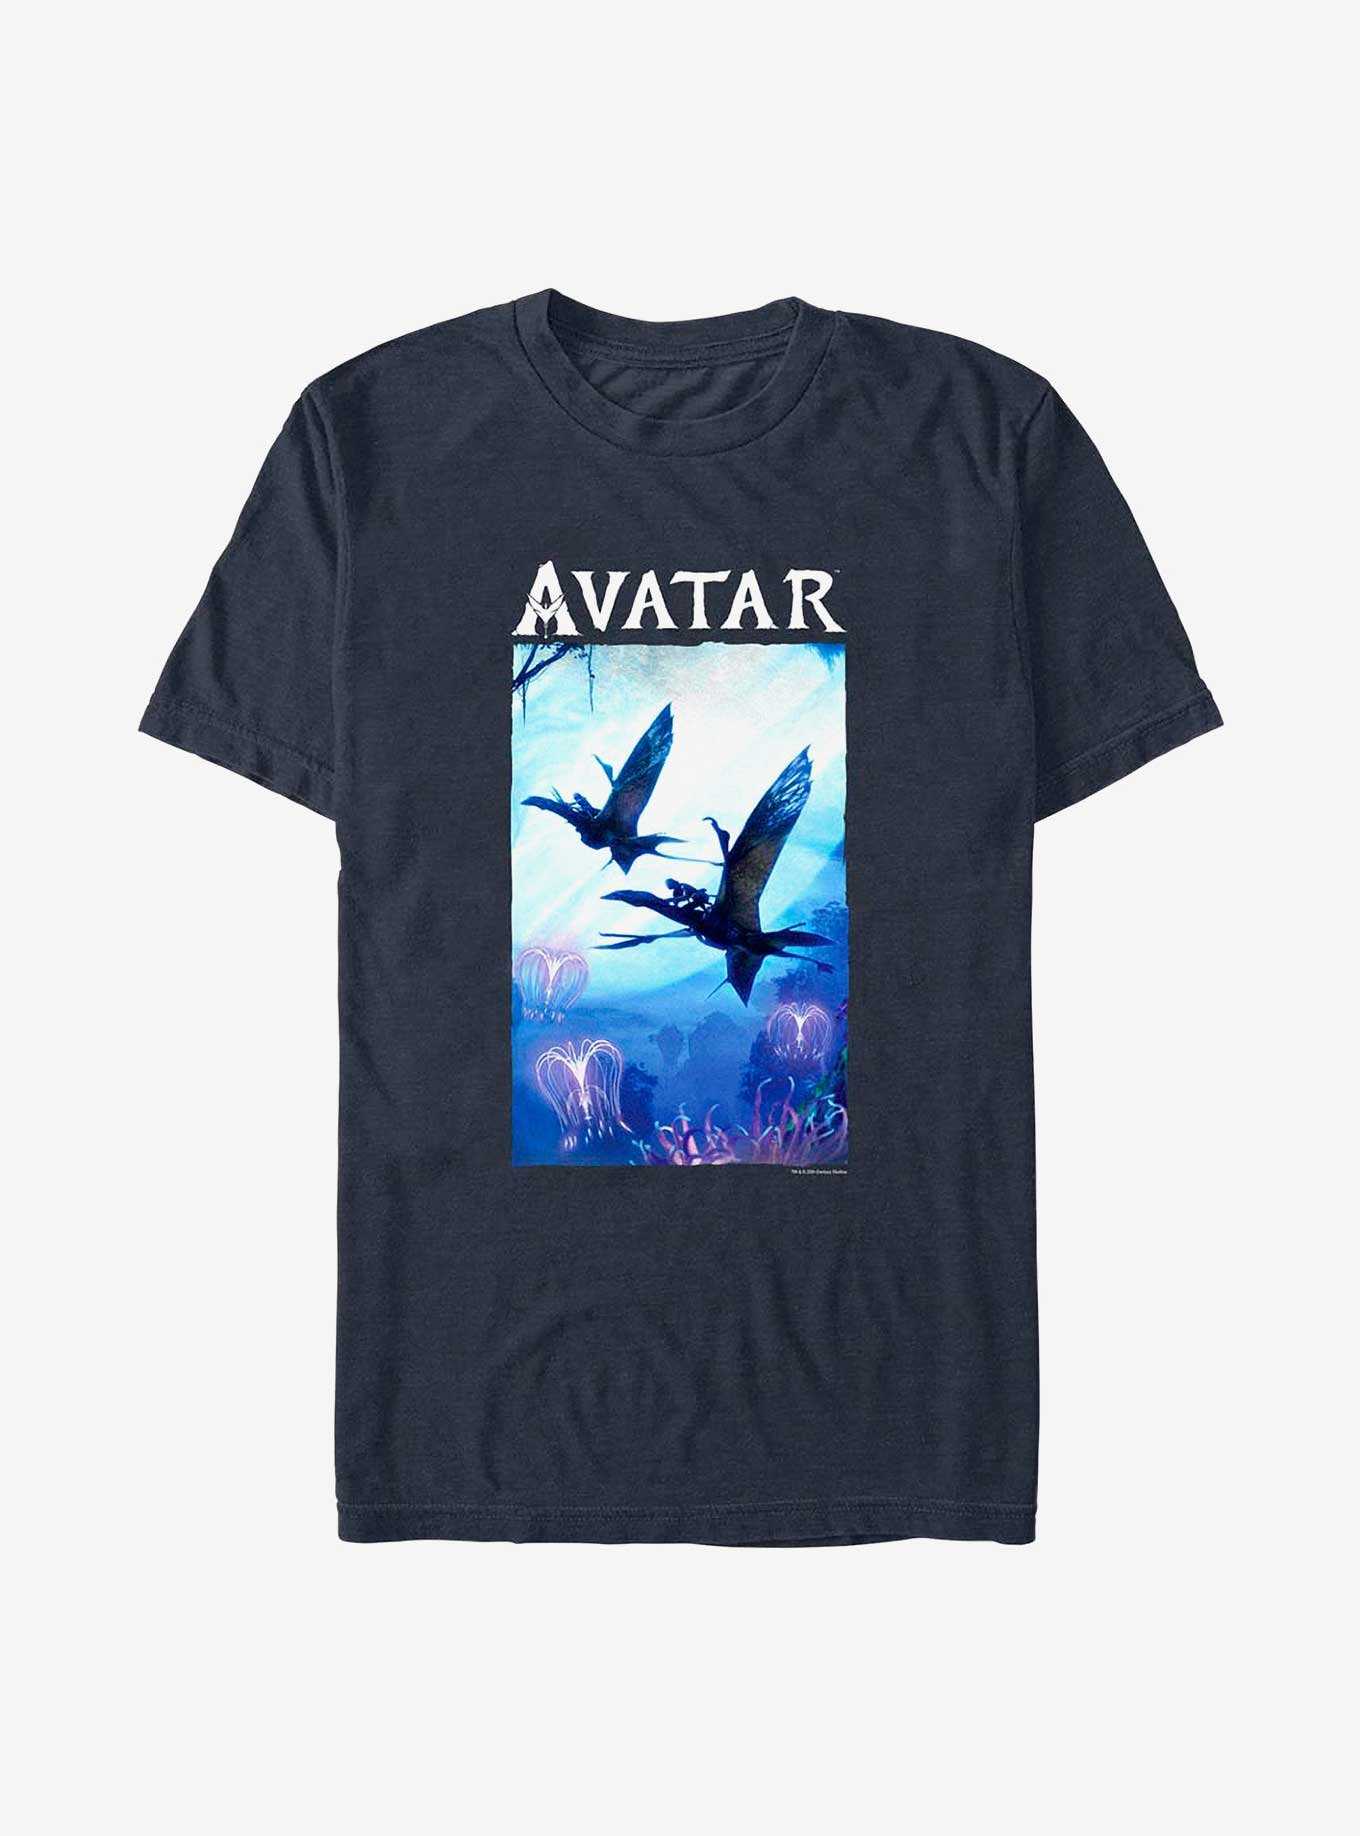 Avatar: The Way of Water Air Time Poster T-Shirt, , hi-res